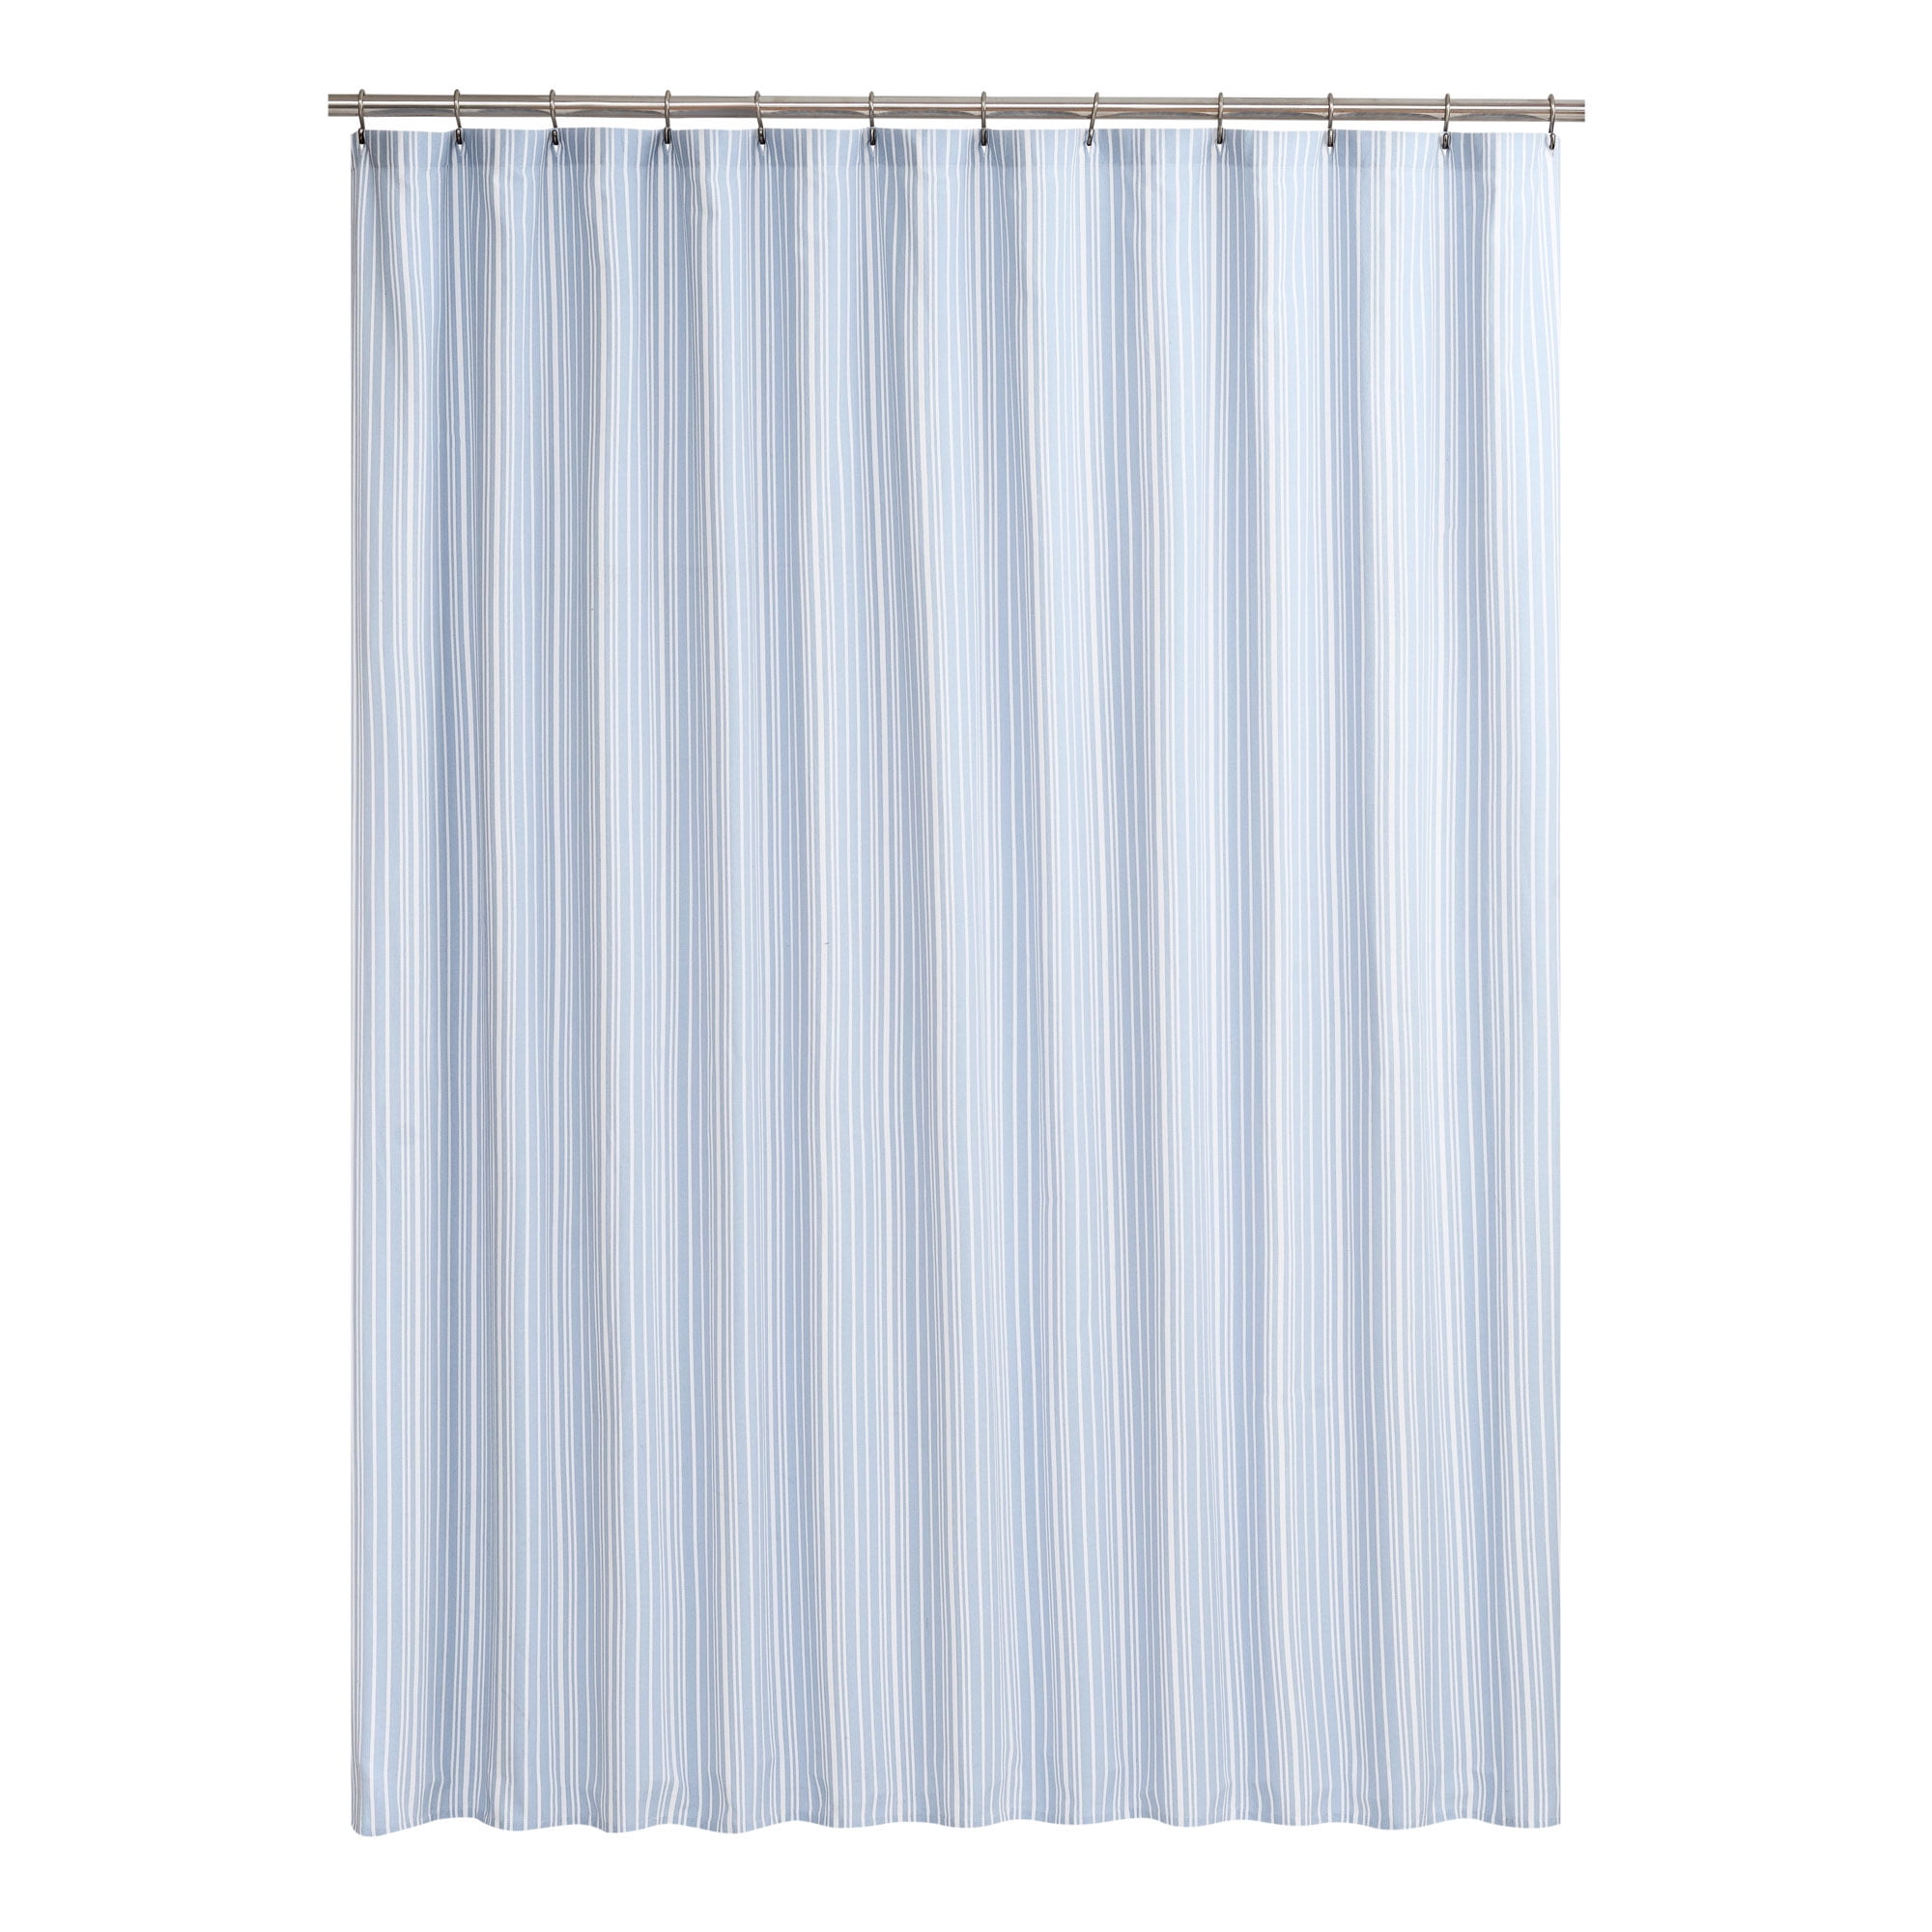 Mainstays White & Chambray Stripe 72” x 72”Shower Curtain, 1 Count 